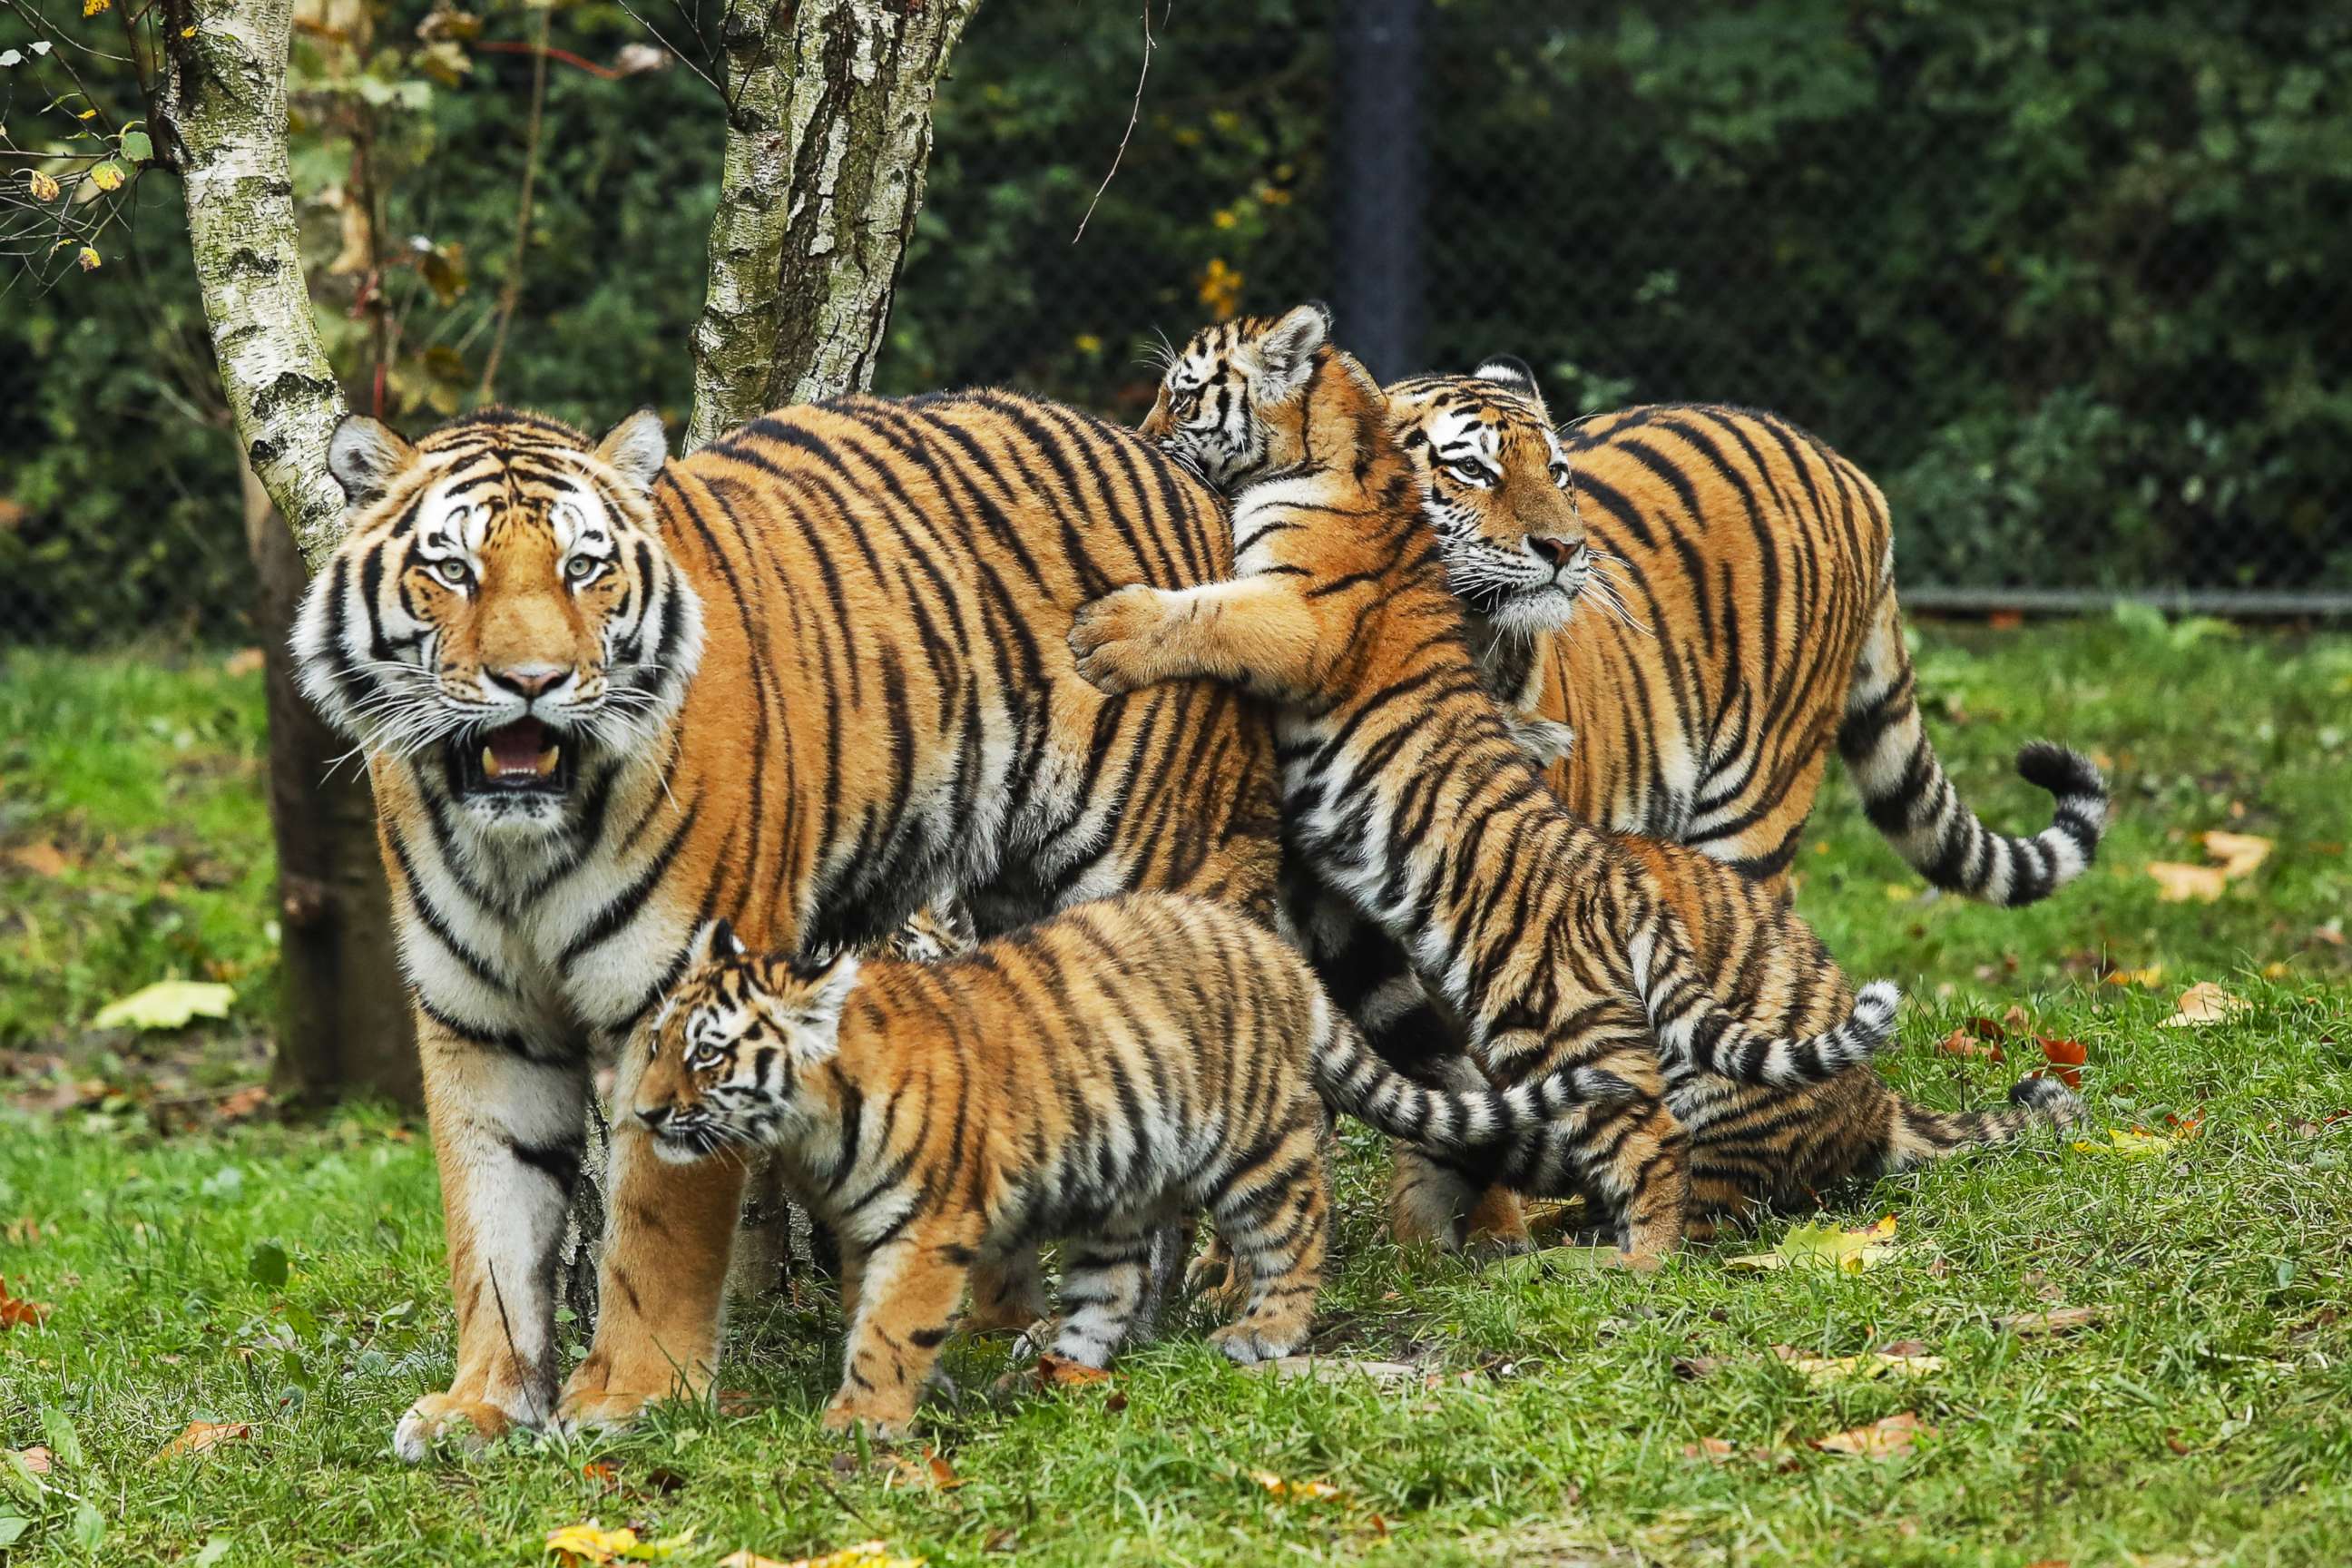 PHOTO: Tiger cubs meet their father, Yasha, for the first time at Hagenbeck Zoo in Hamburg, Germany, Oct. 26, 2017.